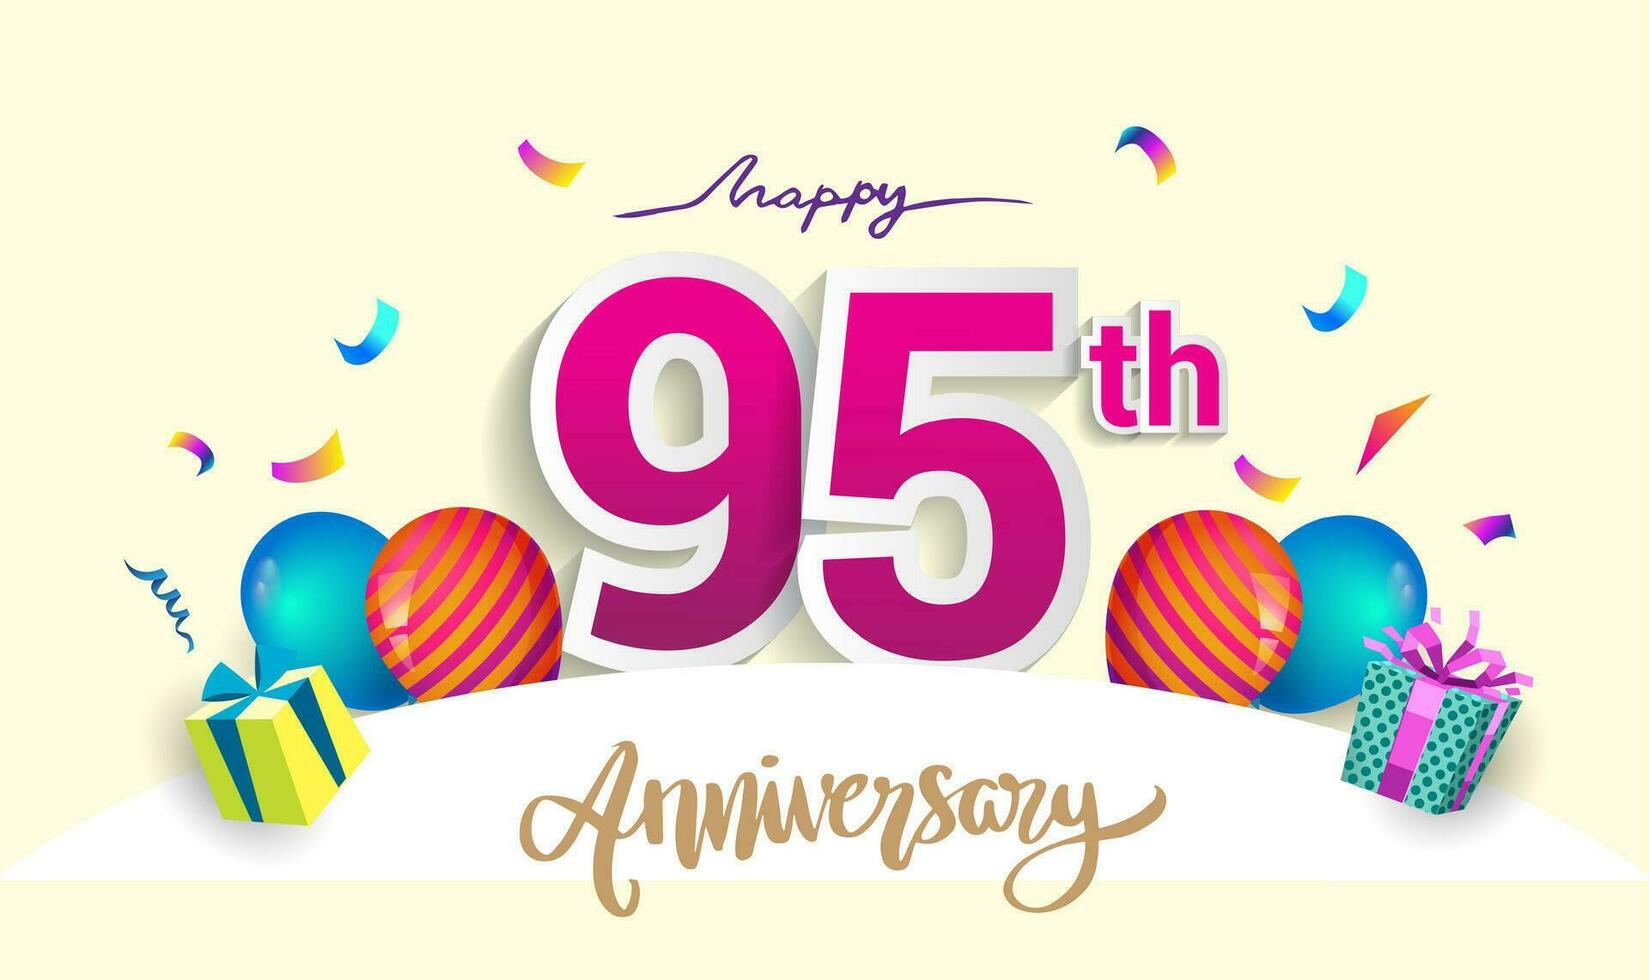 95th Years Anniversary Celebration Design, with gift box and balloons, ribbon, Colorful Vector template elements for your birthday celebrating party.